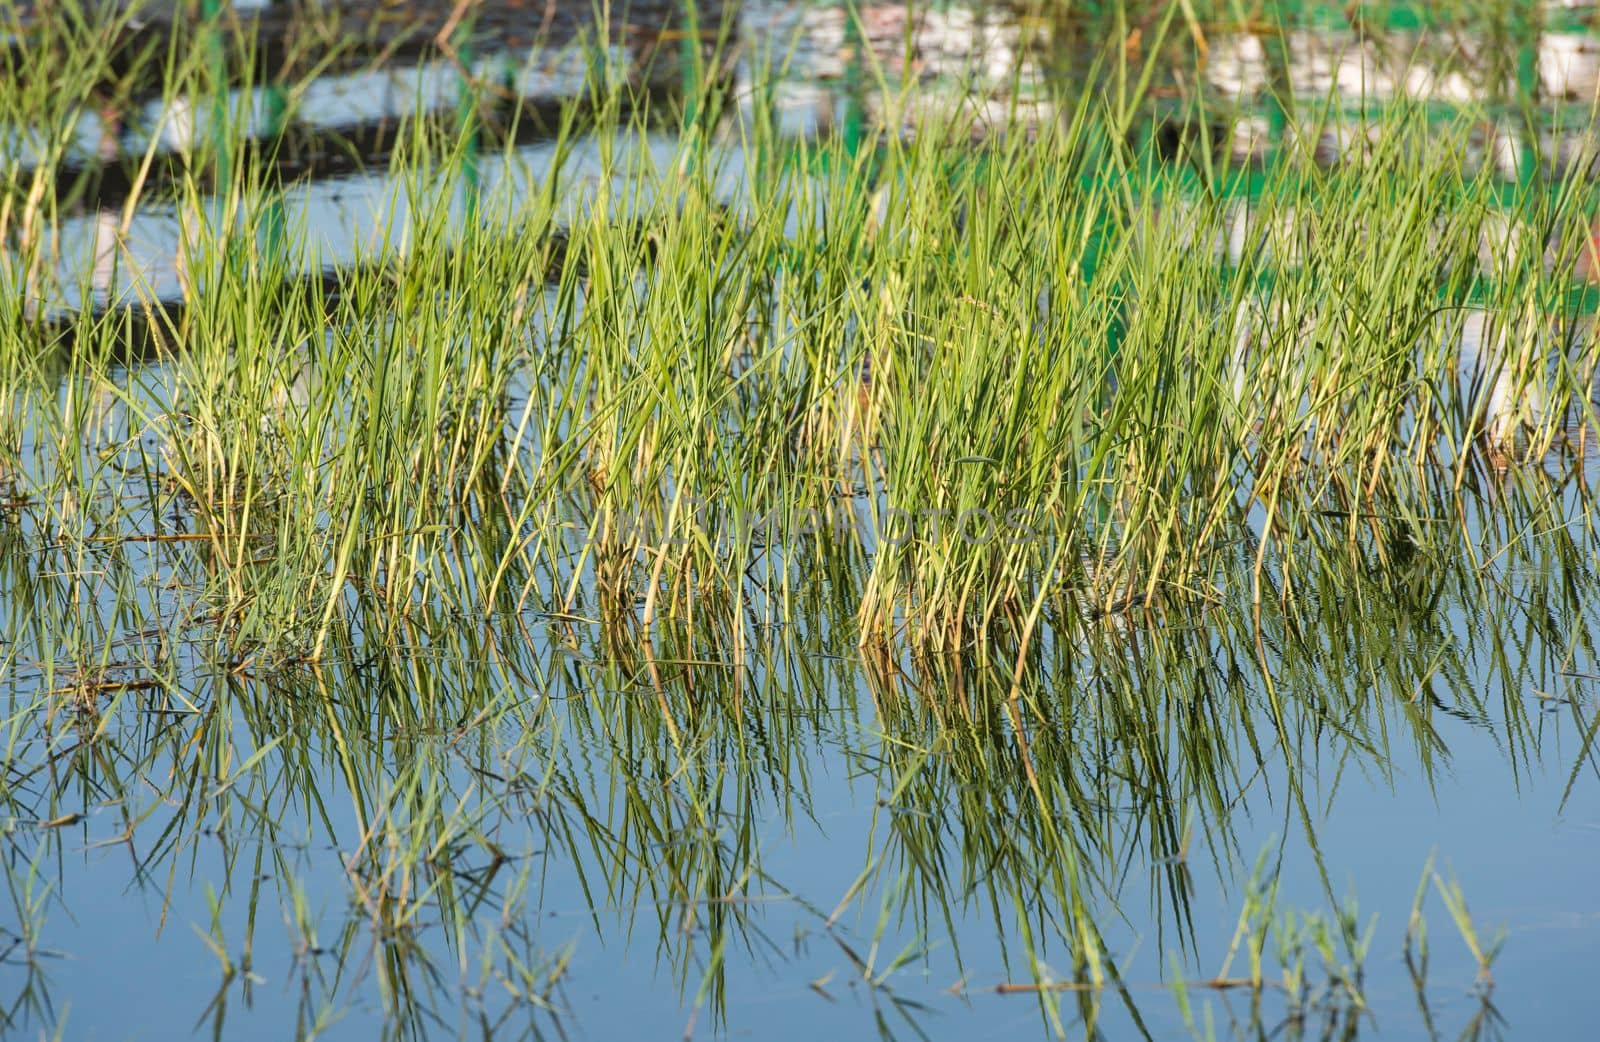 Closeup of grass reeds in water with reflection by paulvinten